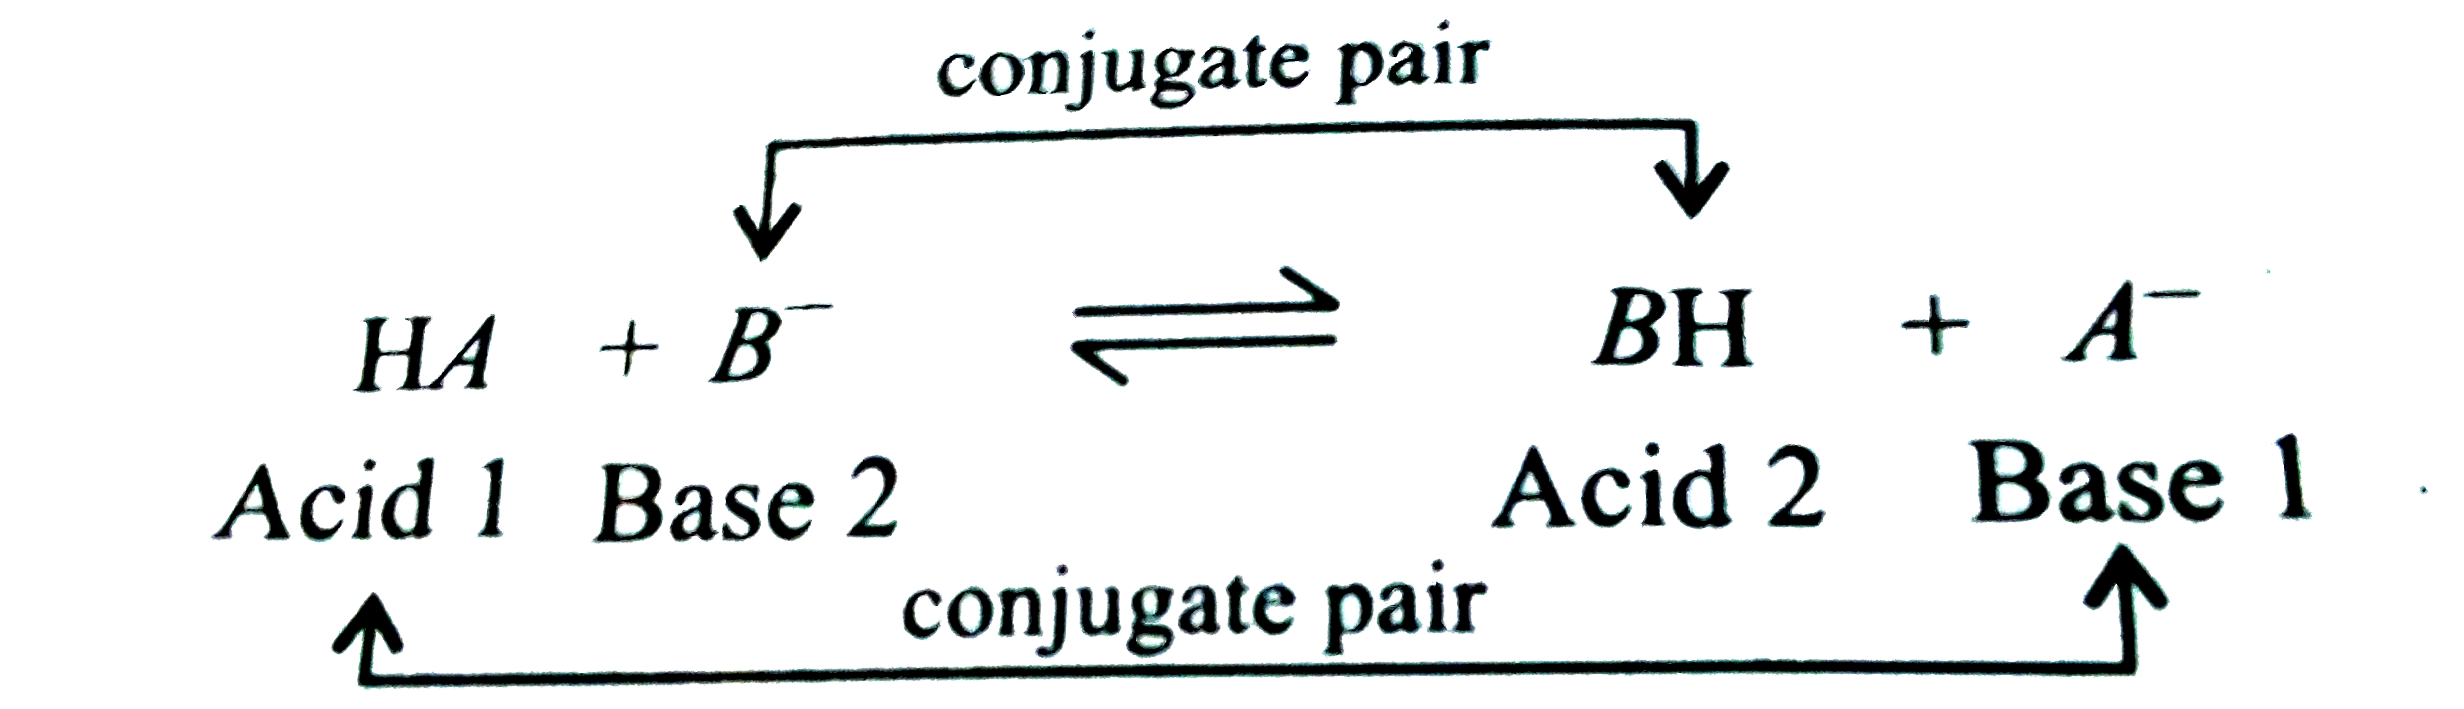 According to Bronsted - Lowry concept of acids and bases a conjugate acid - base paie can exist as      Mark the option in which conjugate pair is not correctly matched.